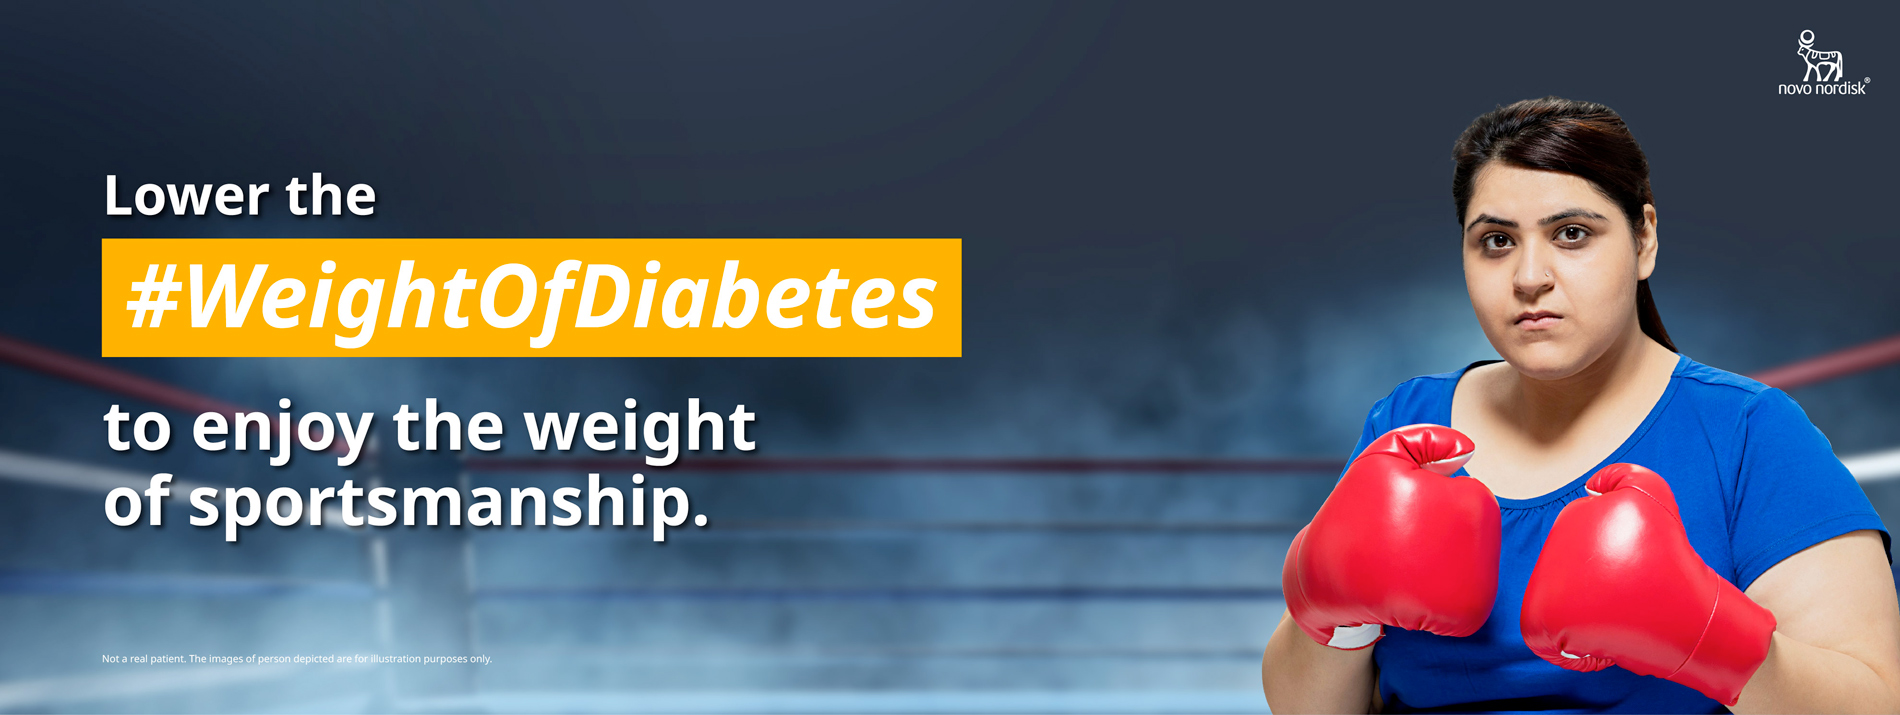 Ways to control blood sugar level and weight in type 2 diabetes.